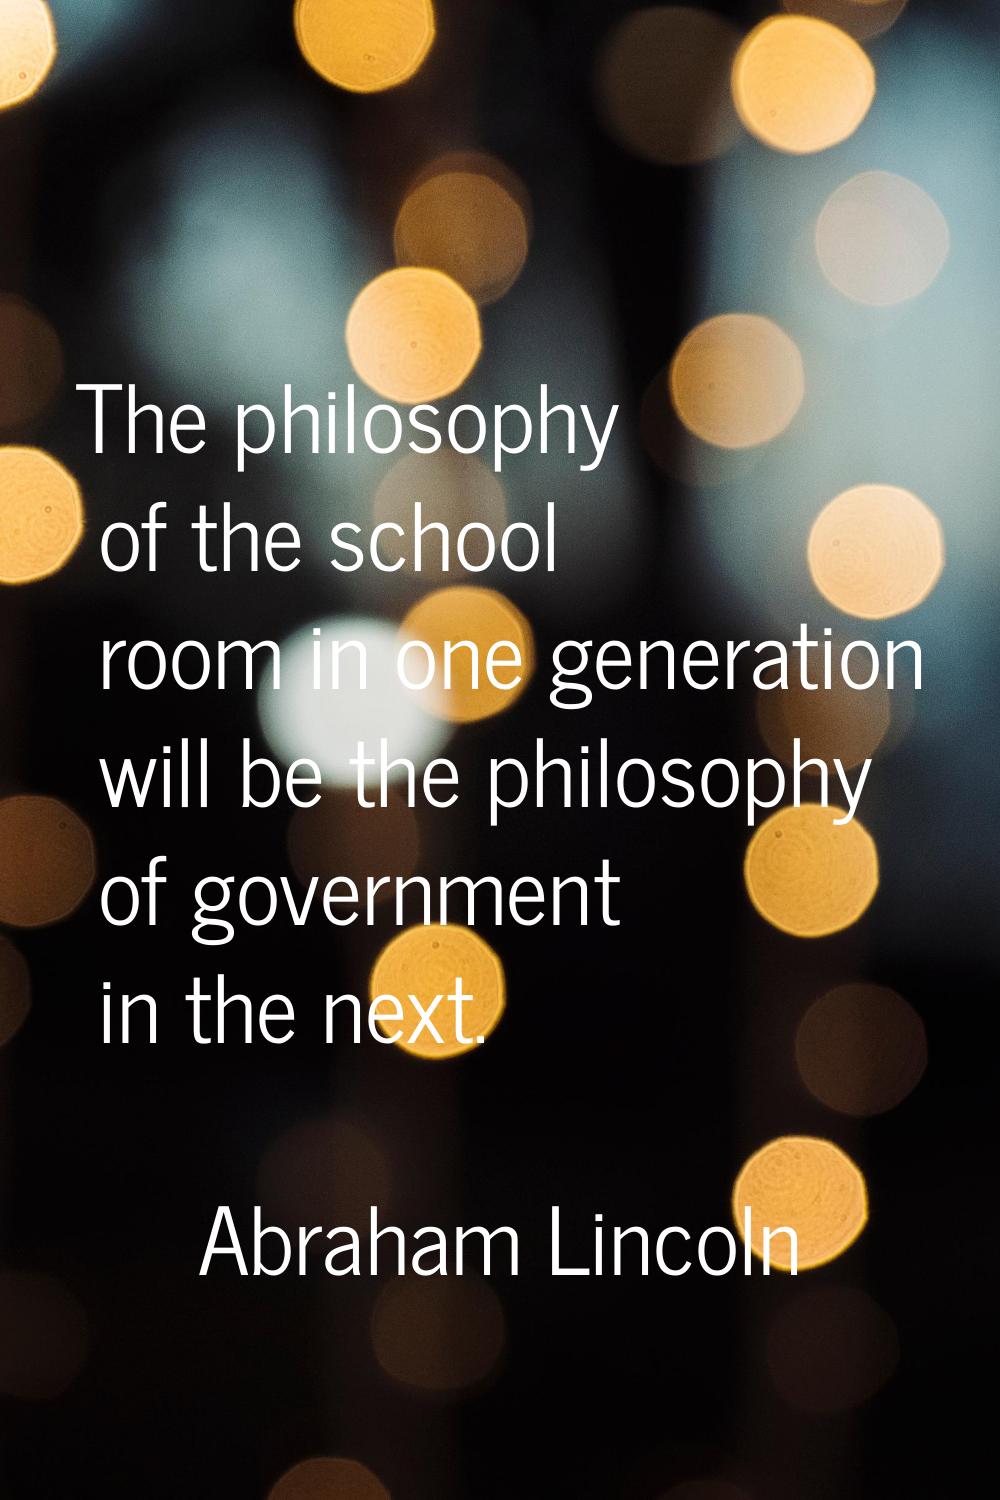 The philosophy of the school room in one generation will be the philosophy of government in the nex